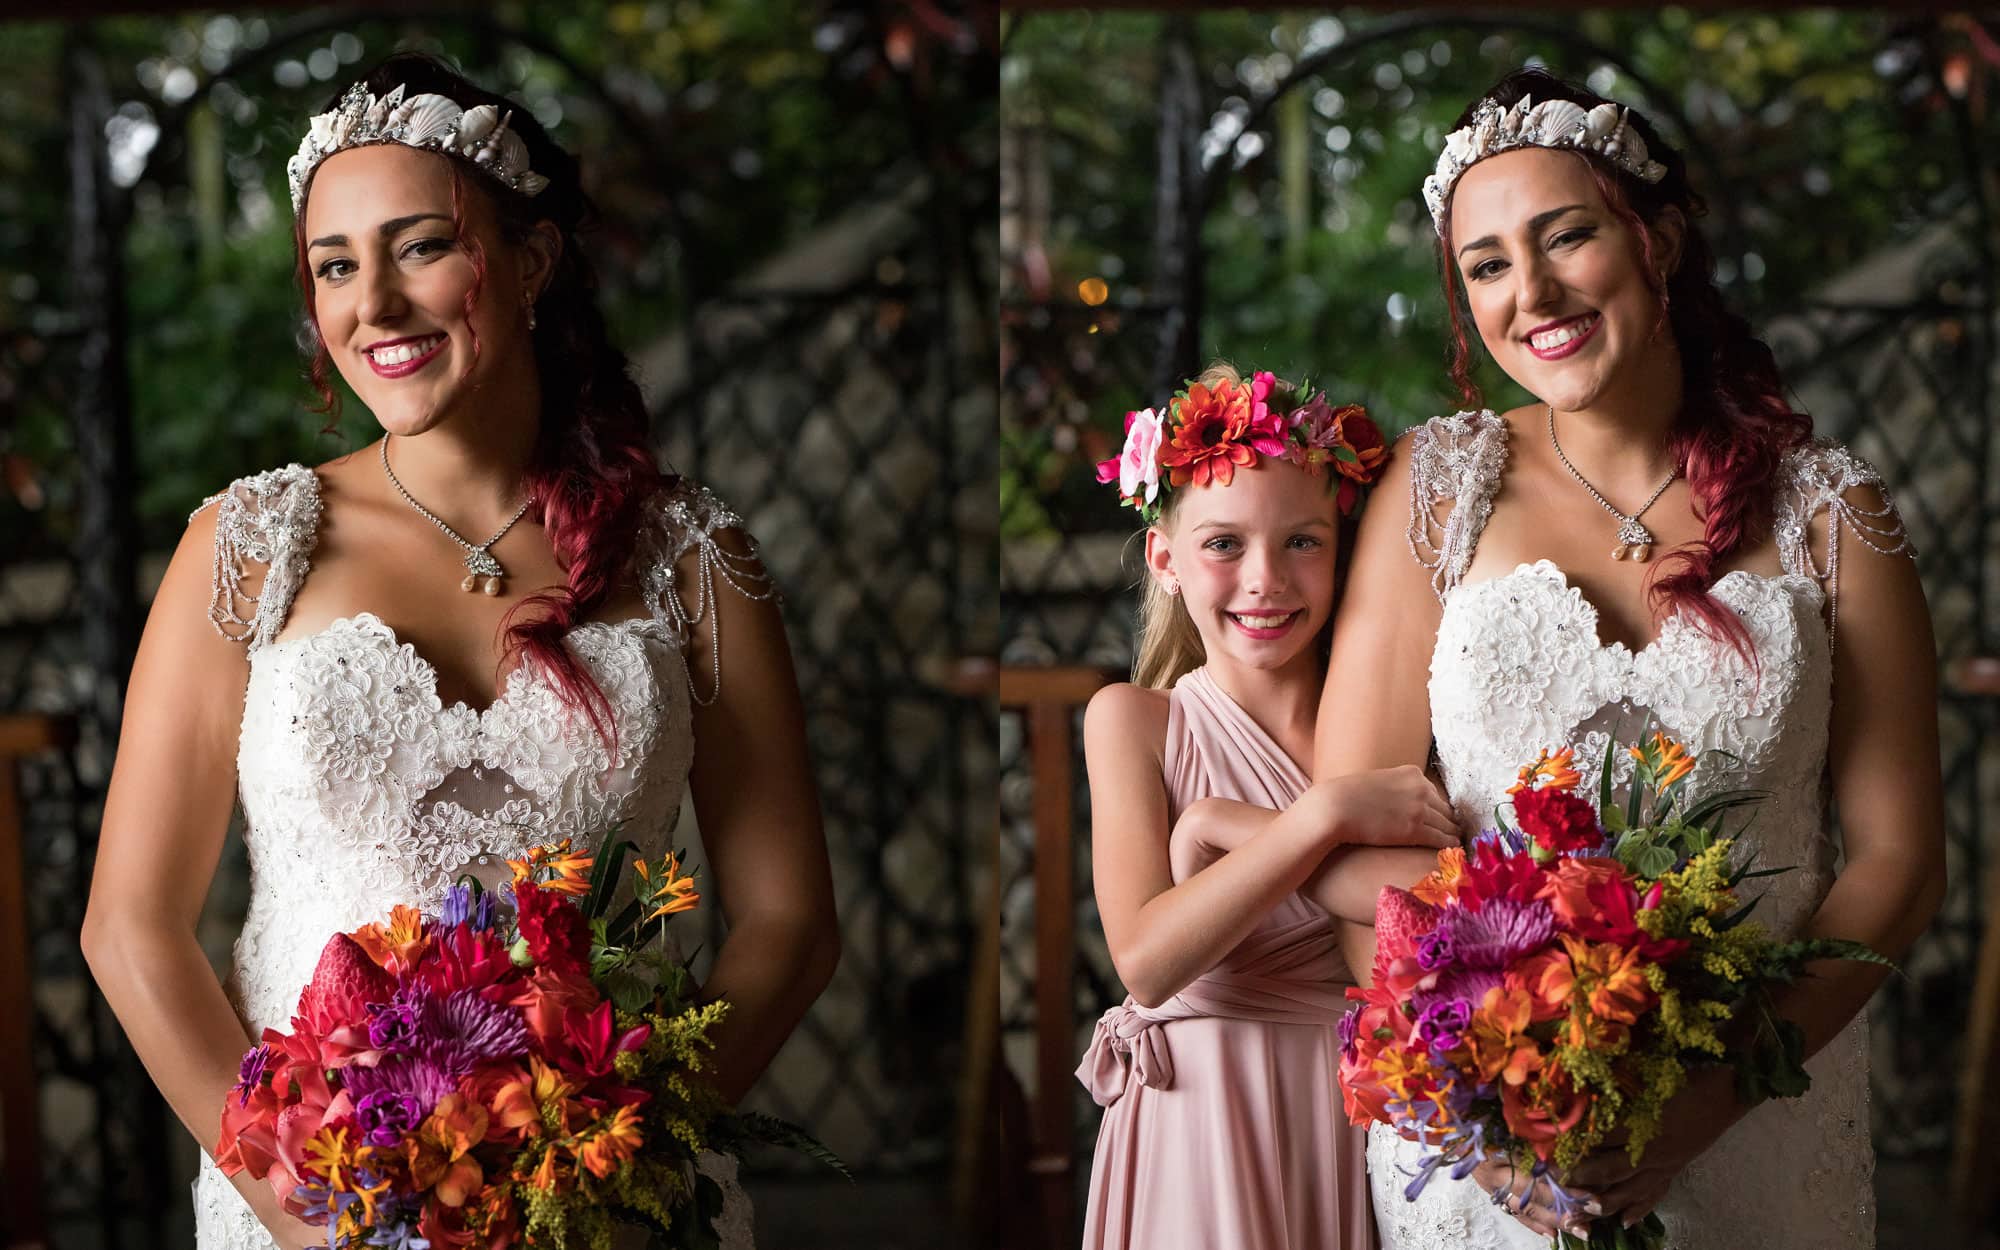 Loves blooms like the lovely flowers in the bride's hands